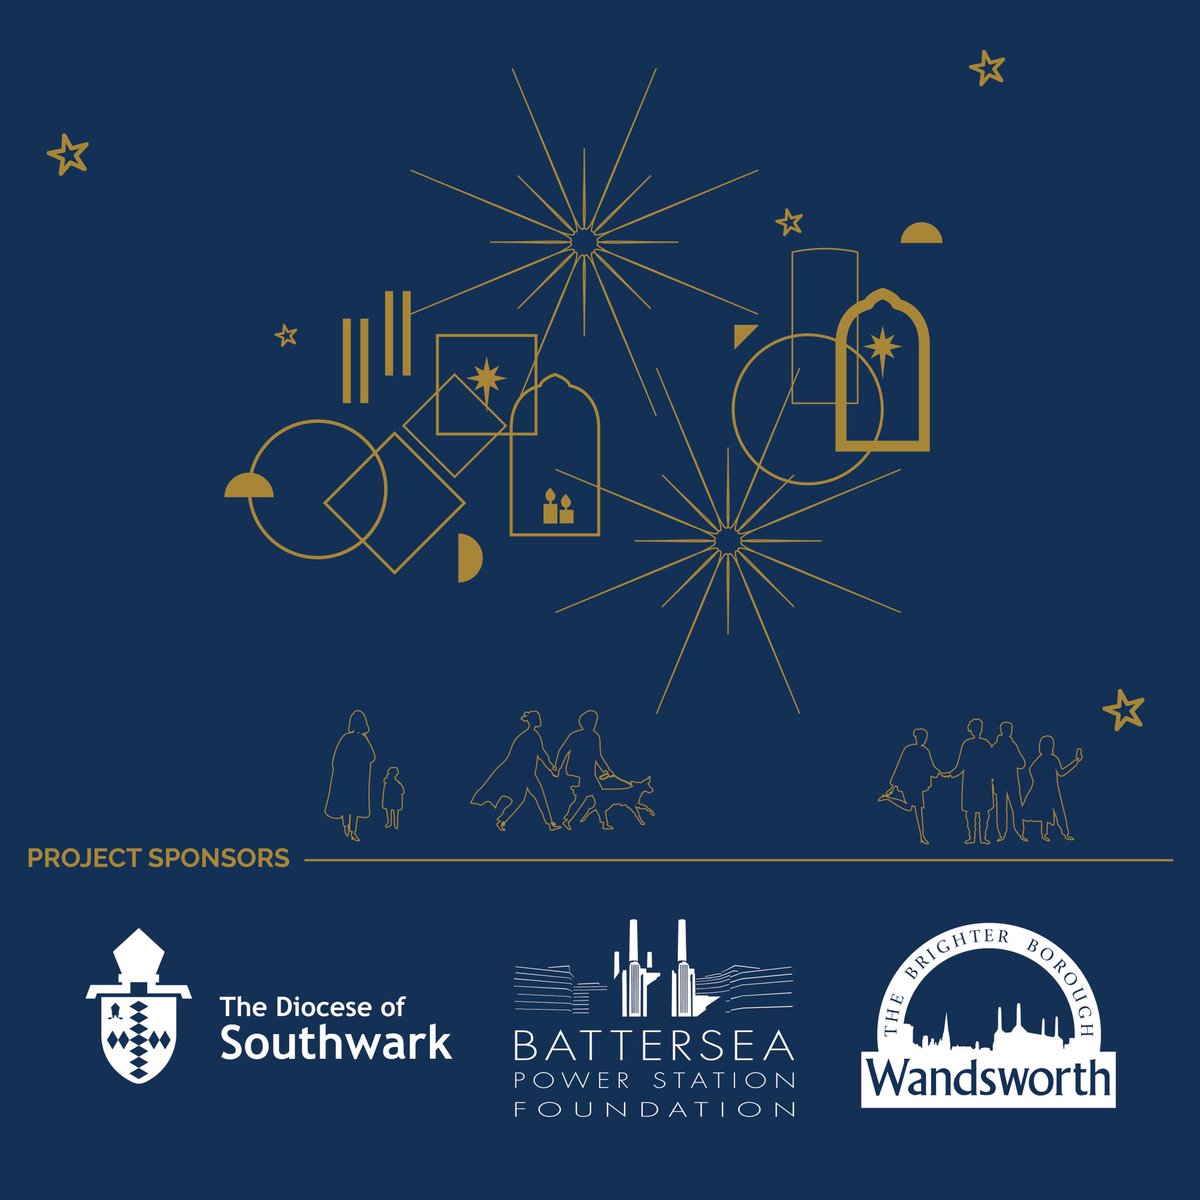 Join us here at 5pm for the opening of window number 5 AND the official launch of the Nine Elms Advent Calendar Trail 🌟 #Battersea #NineElms #London